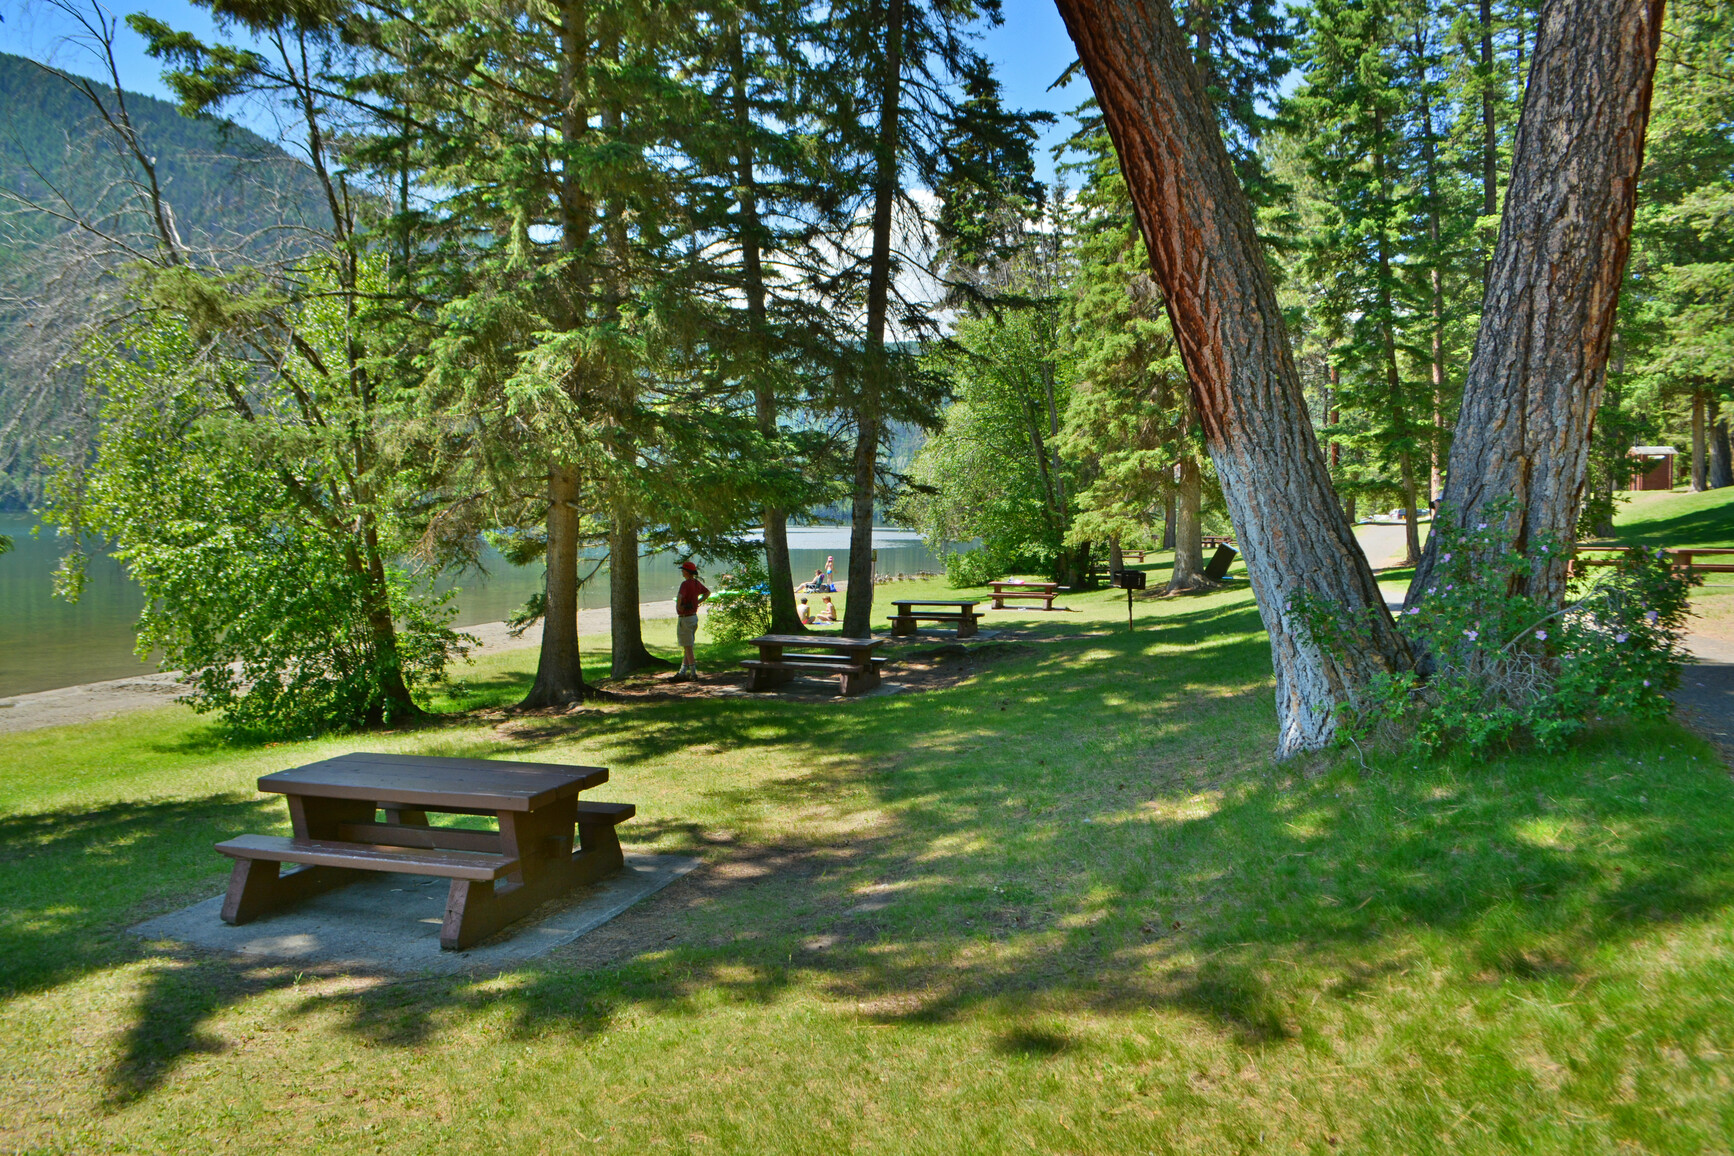 Picnic and beach area by lake.